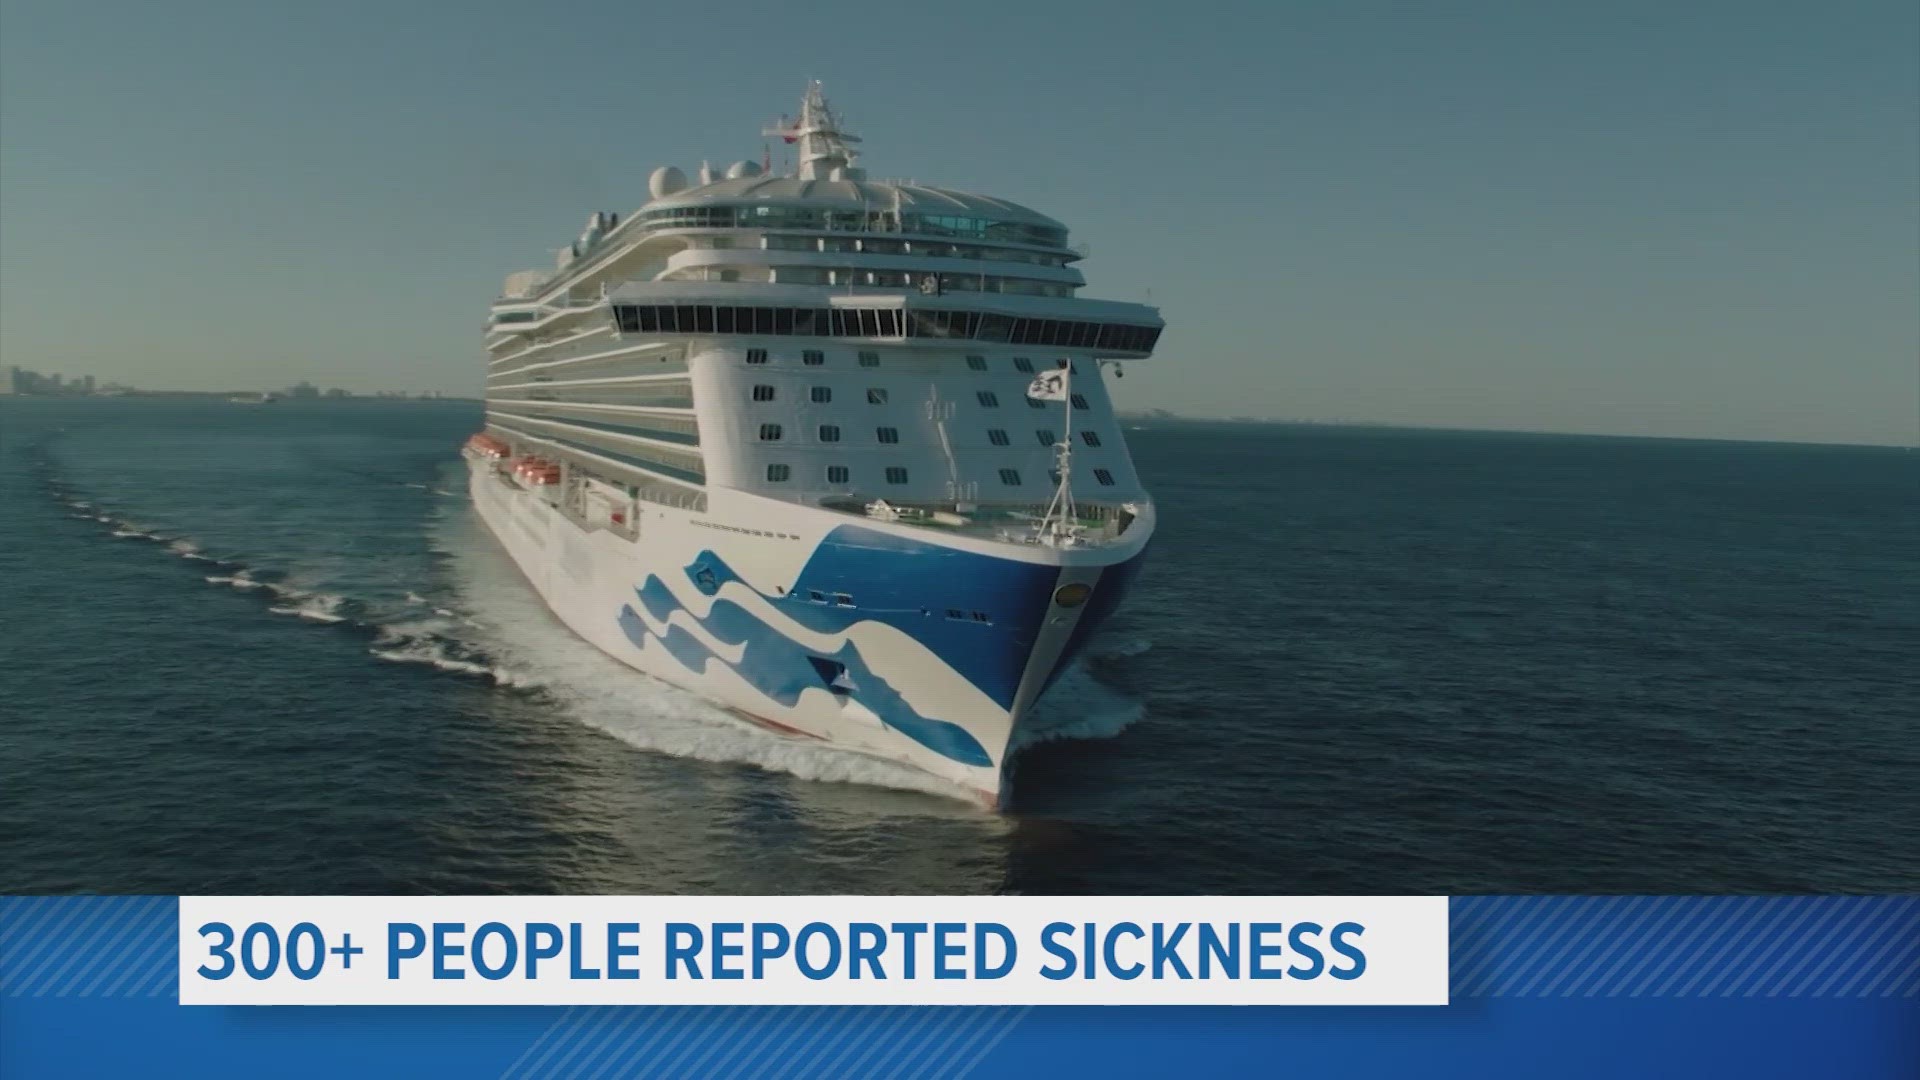 The cruise ship had just returned to Galveston on March 5.  The ill passengers reported gastrointestinal issues.